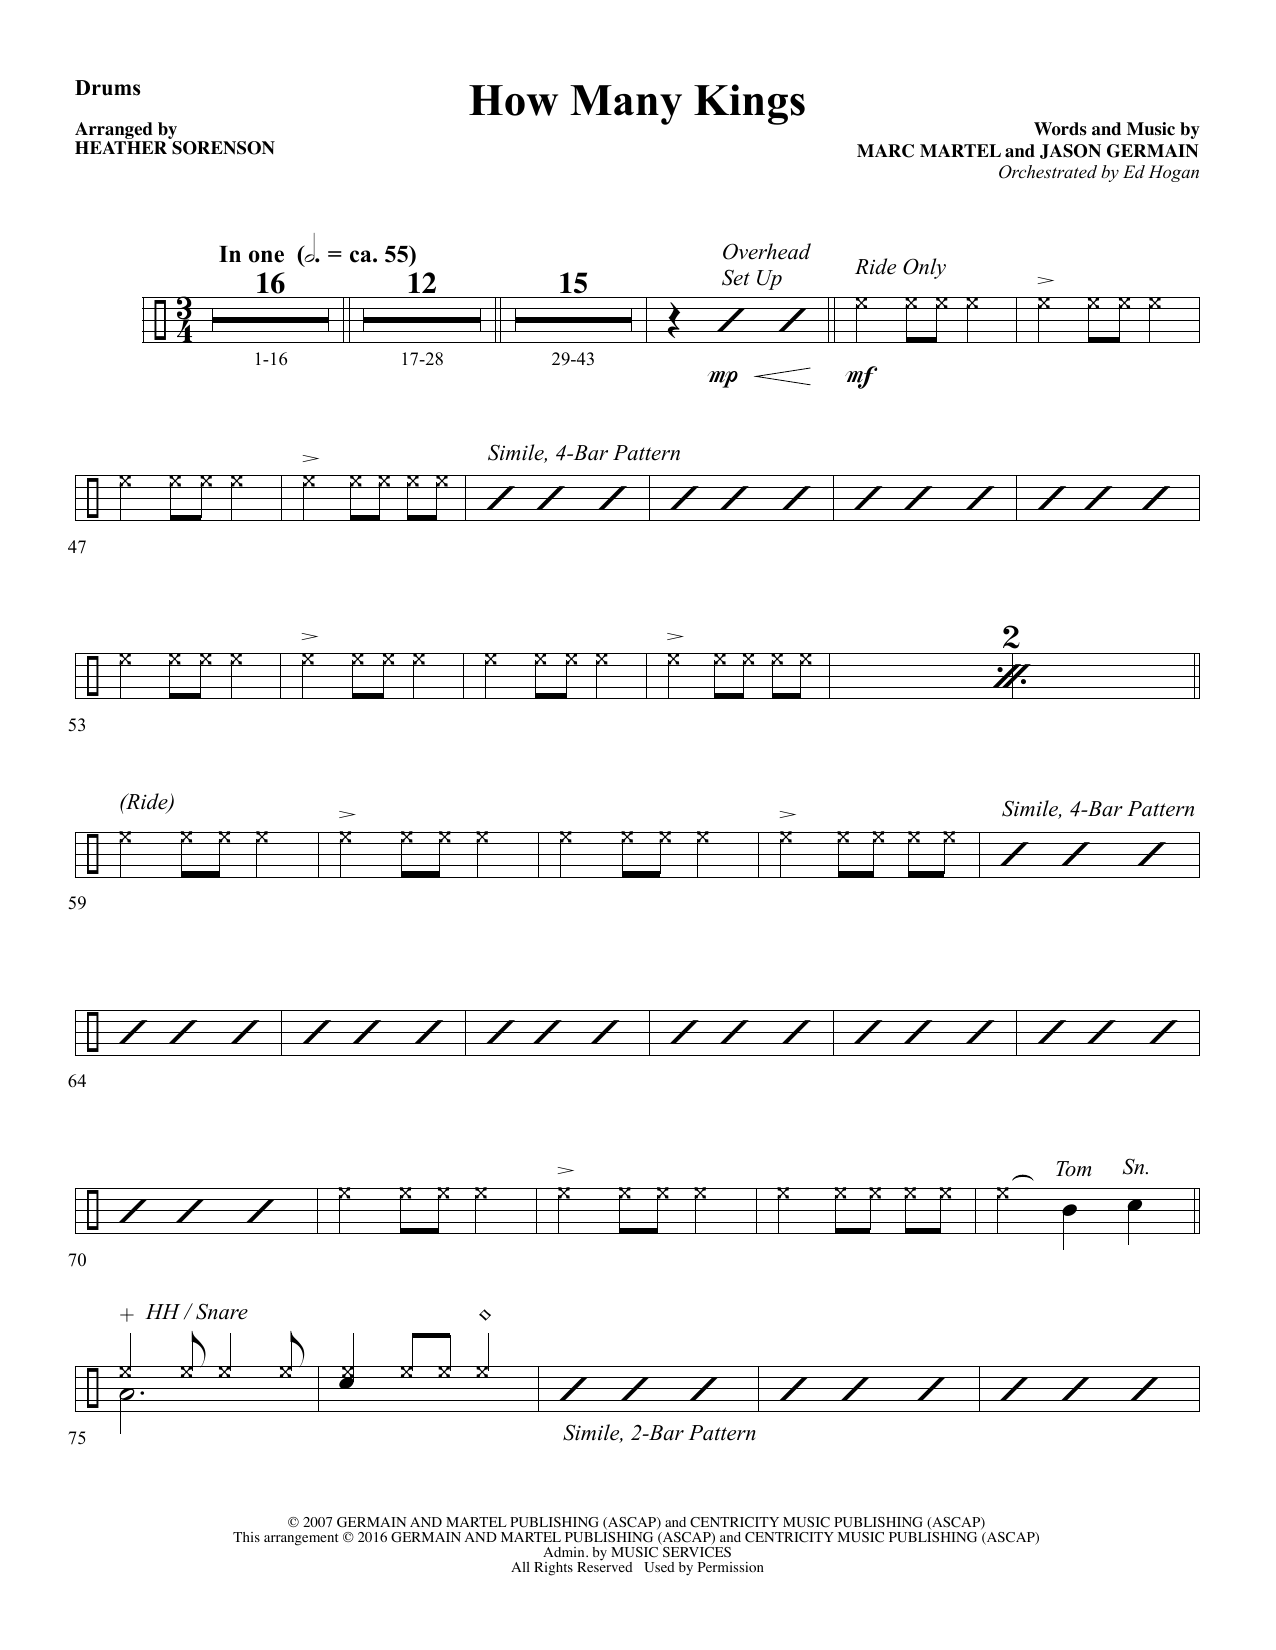 Download Heather Sorenson How Many Kings - Drums sheet music and printable PDF score & Christian music notes